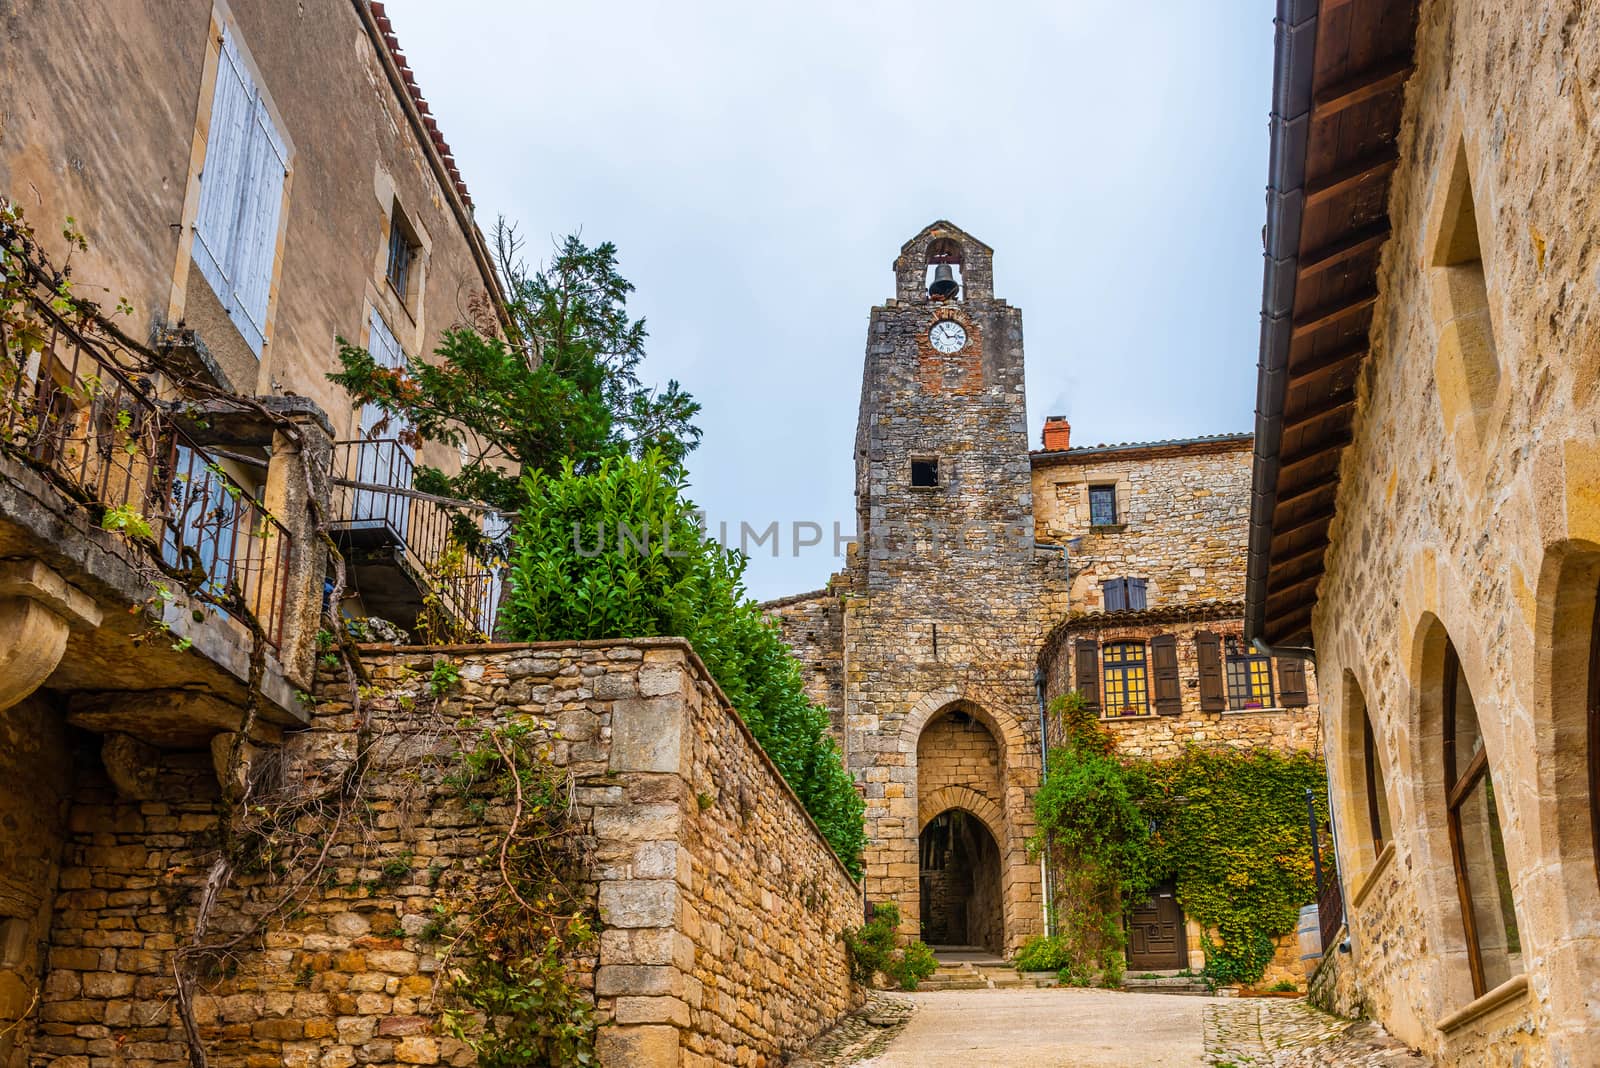 Beautiful medieval village of Bruniquel on the river Aveyron in Occitania, France by Frederic